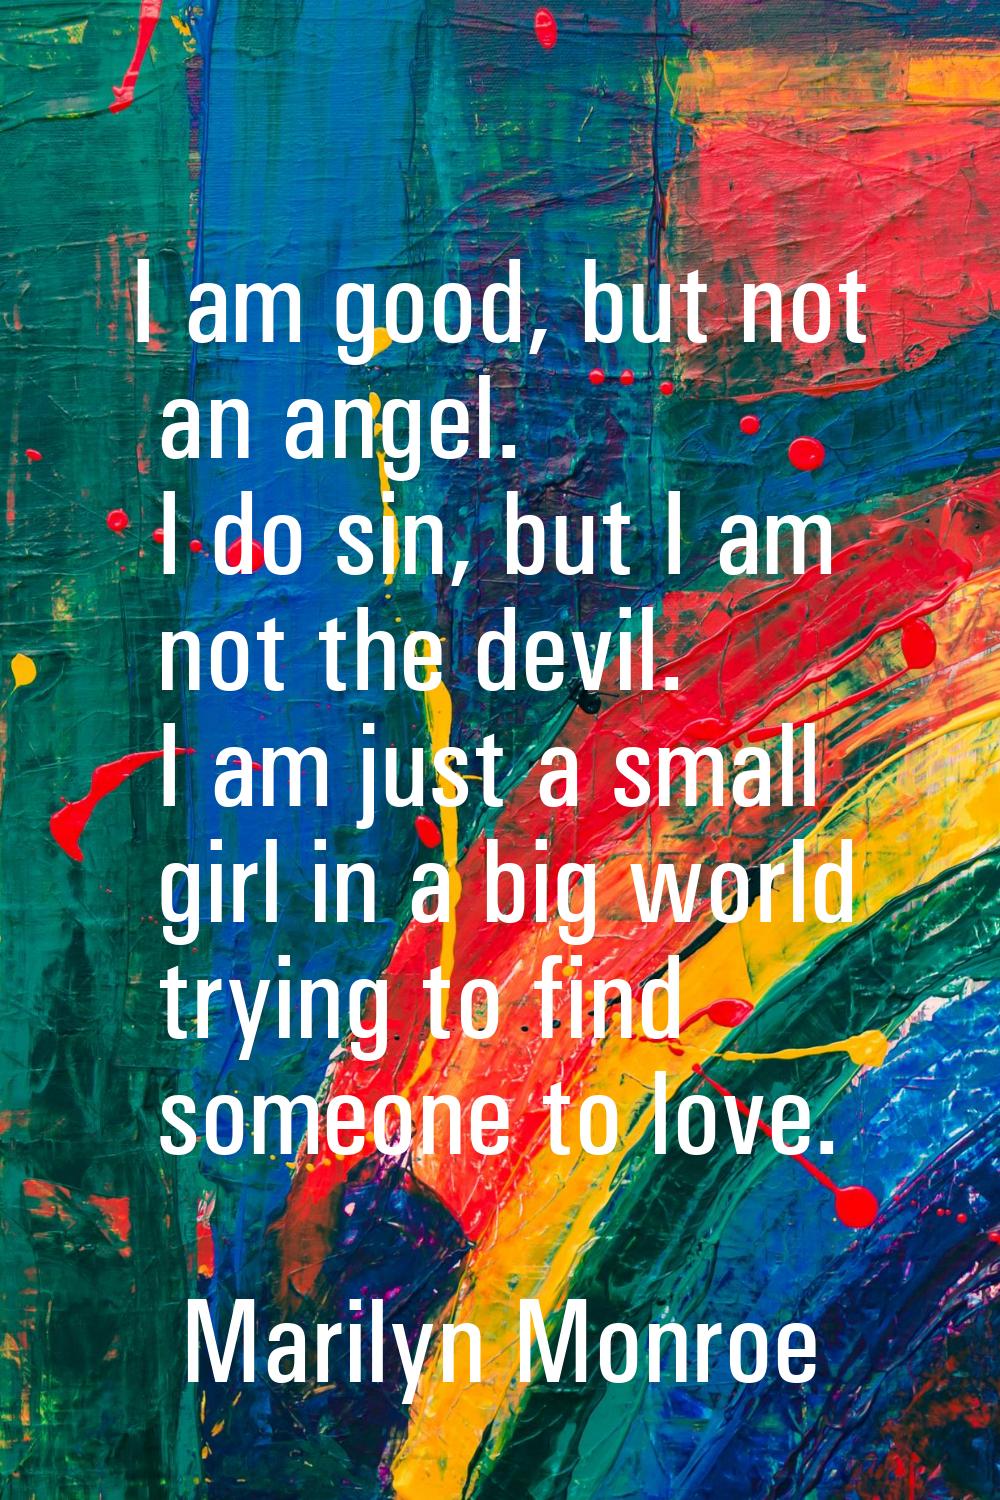 I am good, but not an angel. I do sin, but I am not the devil. I am just a small girl in a big worl